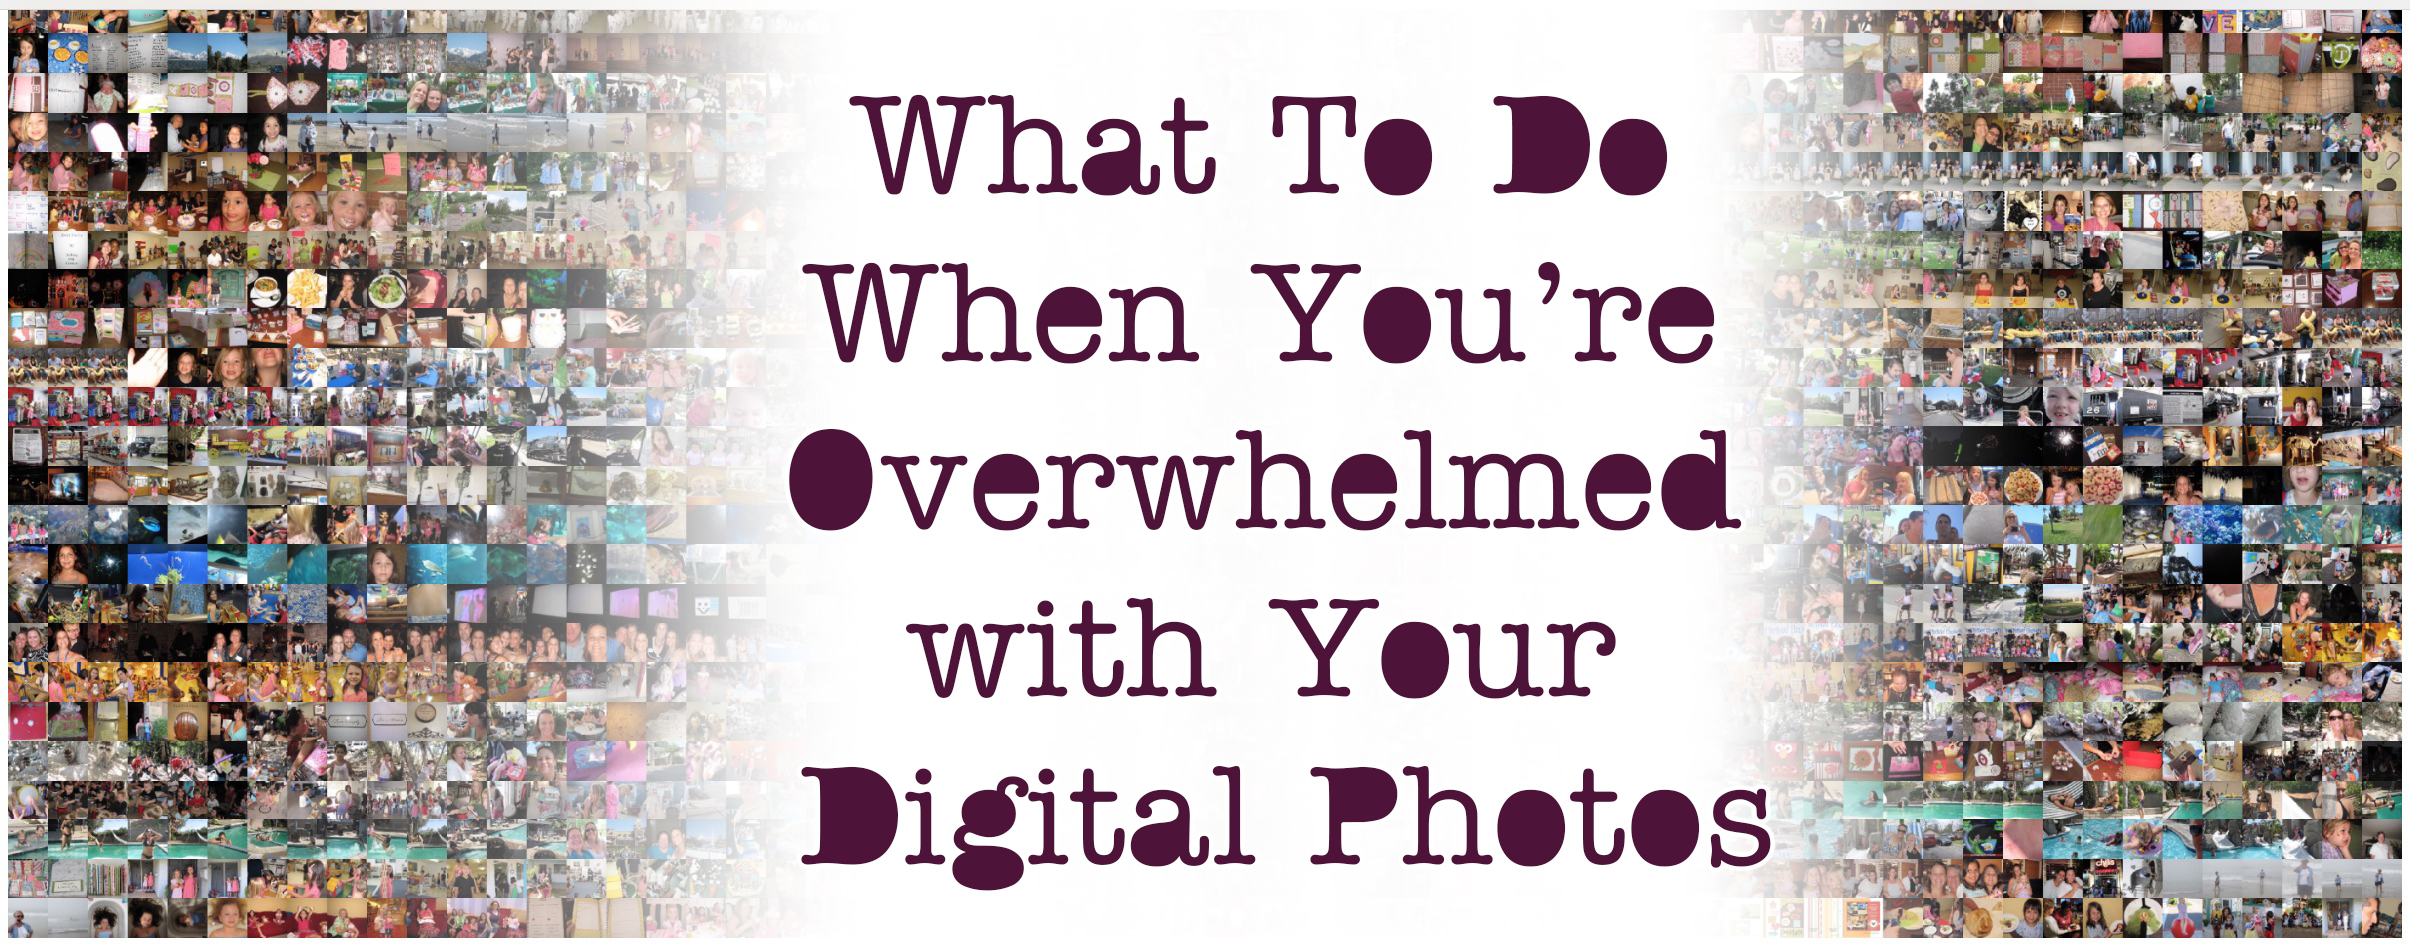 What to do when you are overwhelmed with your digital photos